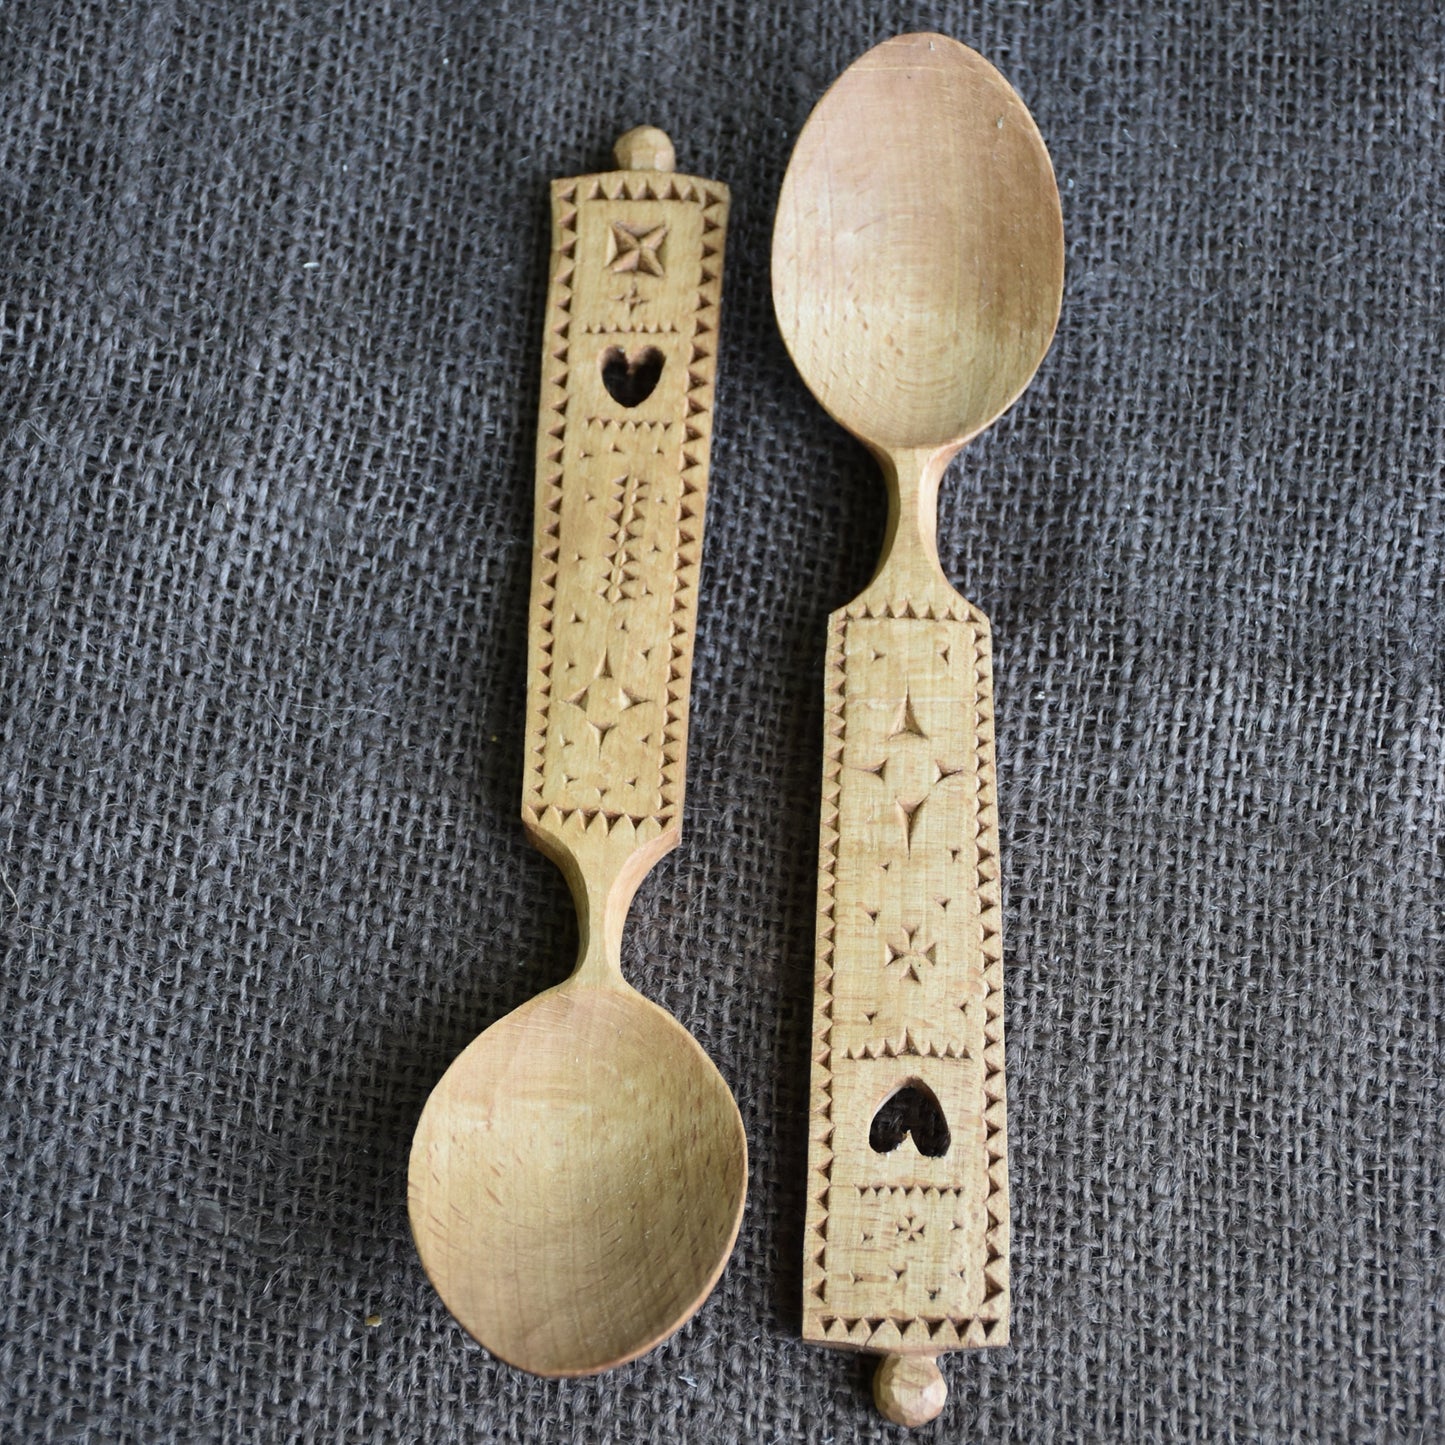 East / West Spoon Carving Series @Southcombe Barn - 08.11.23 / 15.11.23 / 22.11.23